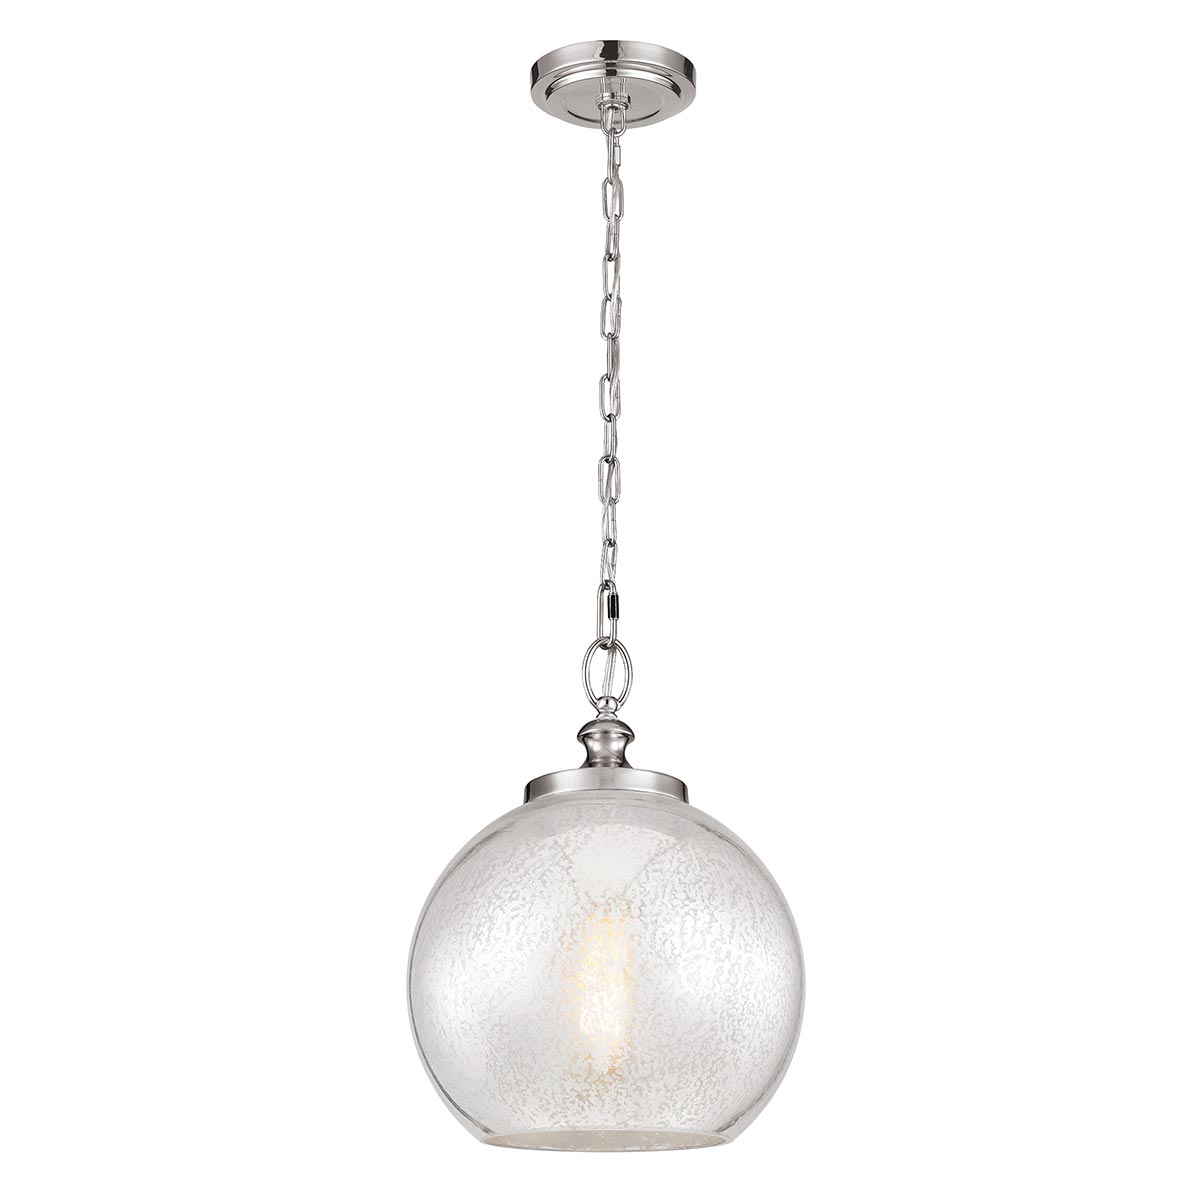 Feiss Tabby Brushed Steel 1 Light Pendant With Mercury Glass Shade